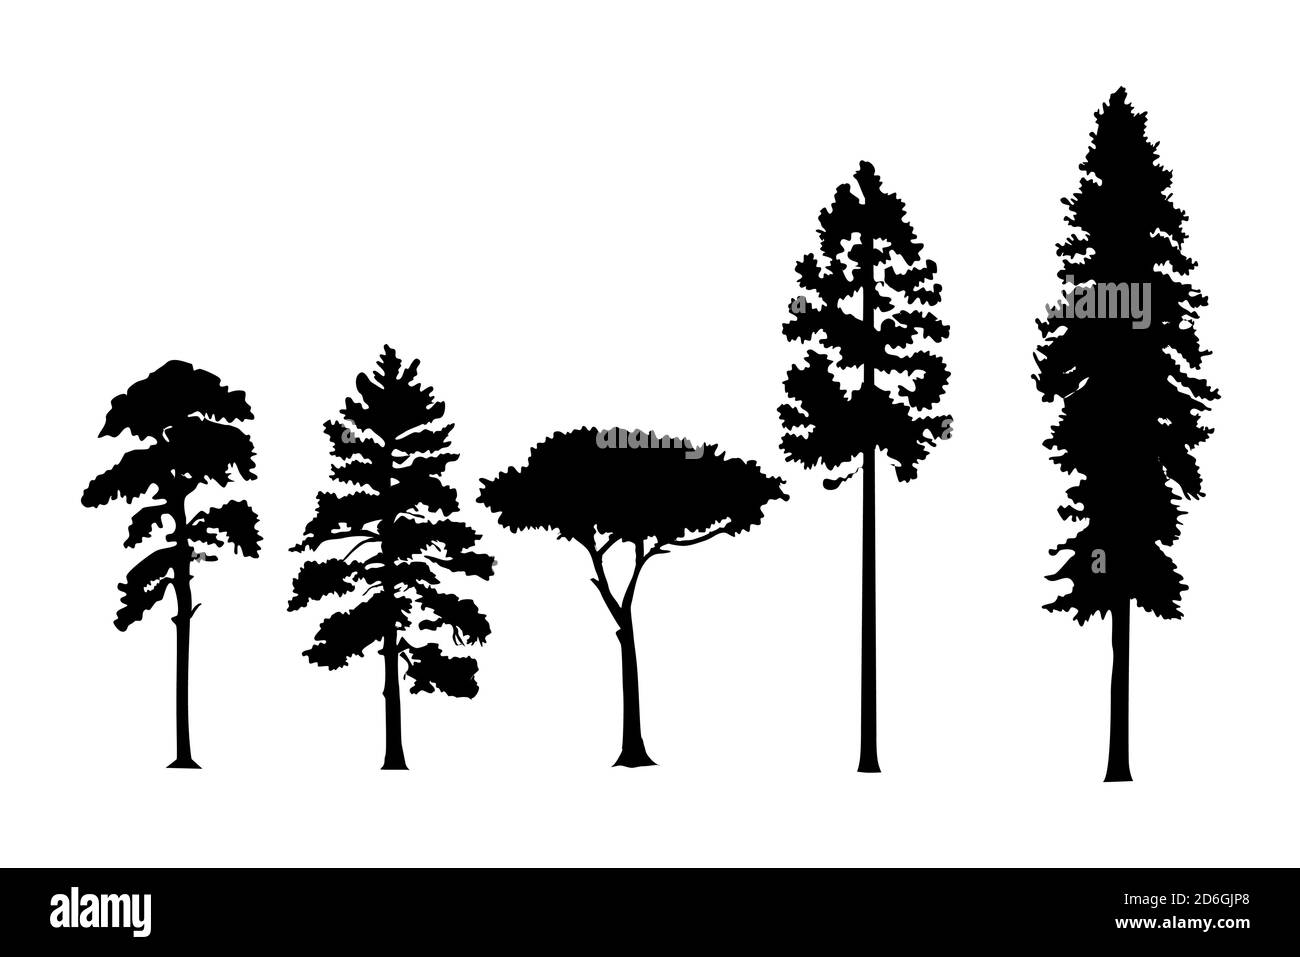 Variety of vector pine trees silhouettes isolated on a white background. Can be used as digital brushes source. Vector. Stock Vector